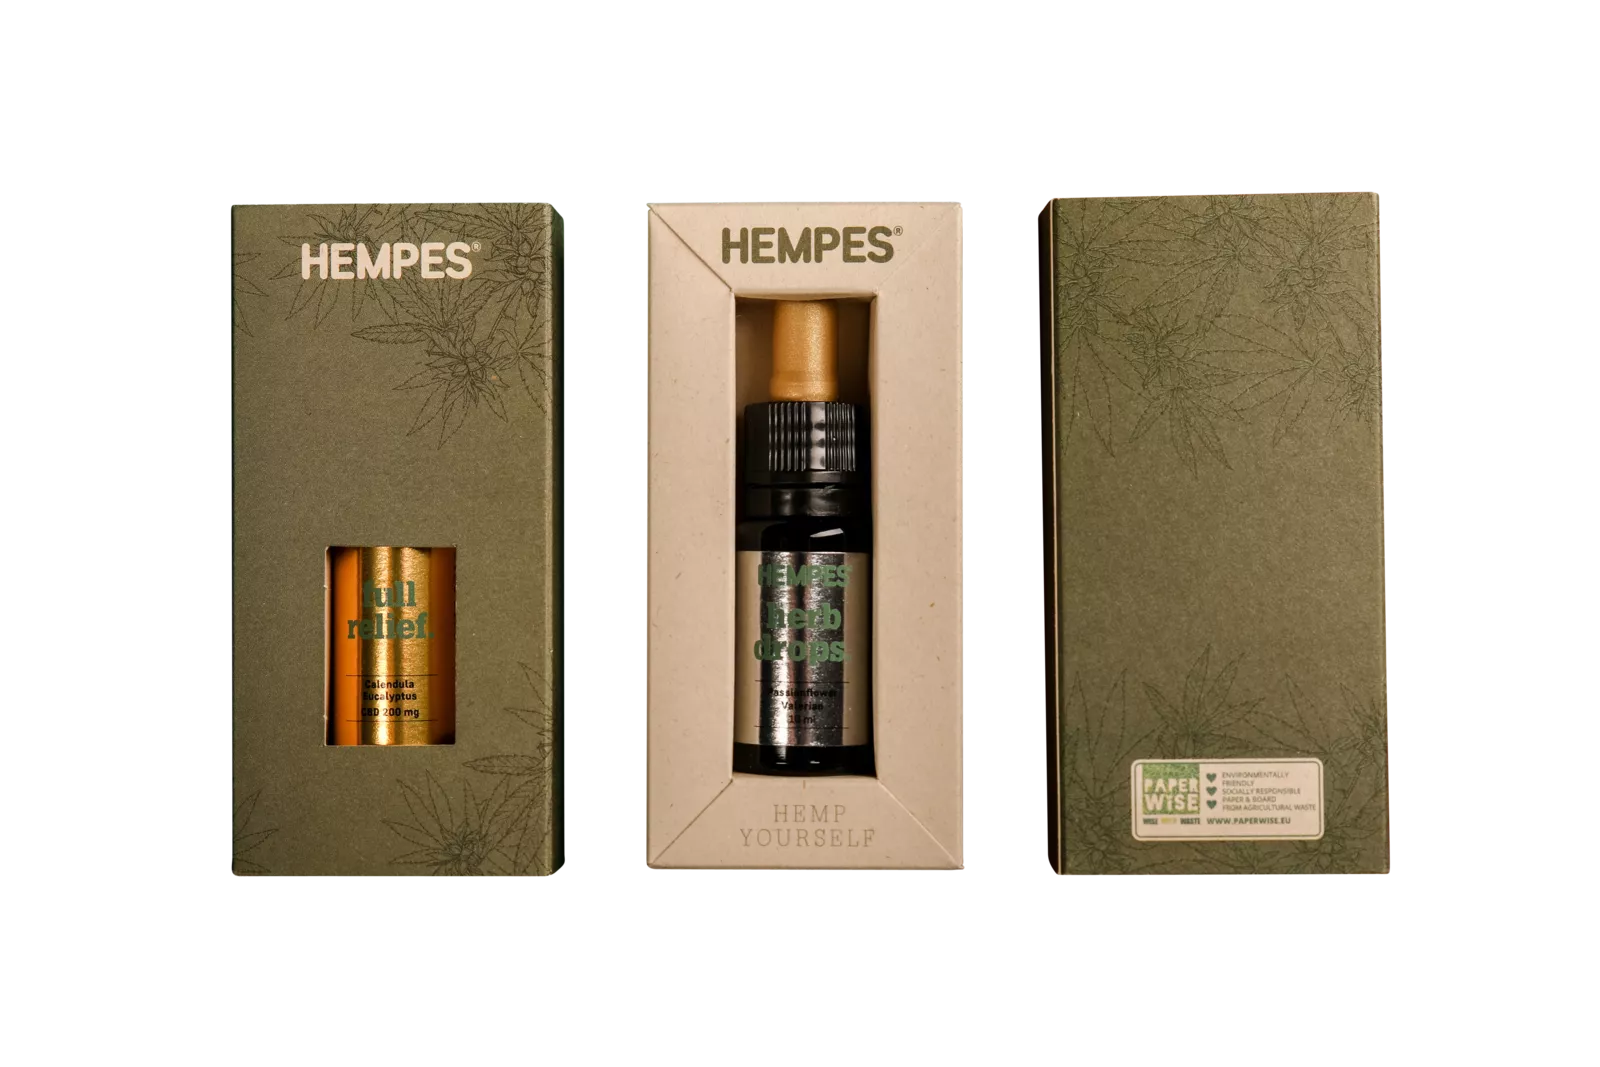 PaperWise eco friendly paper board packaging sustainable packaging healthcare CBD oil Hempes6c